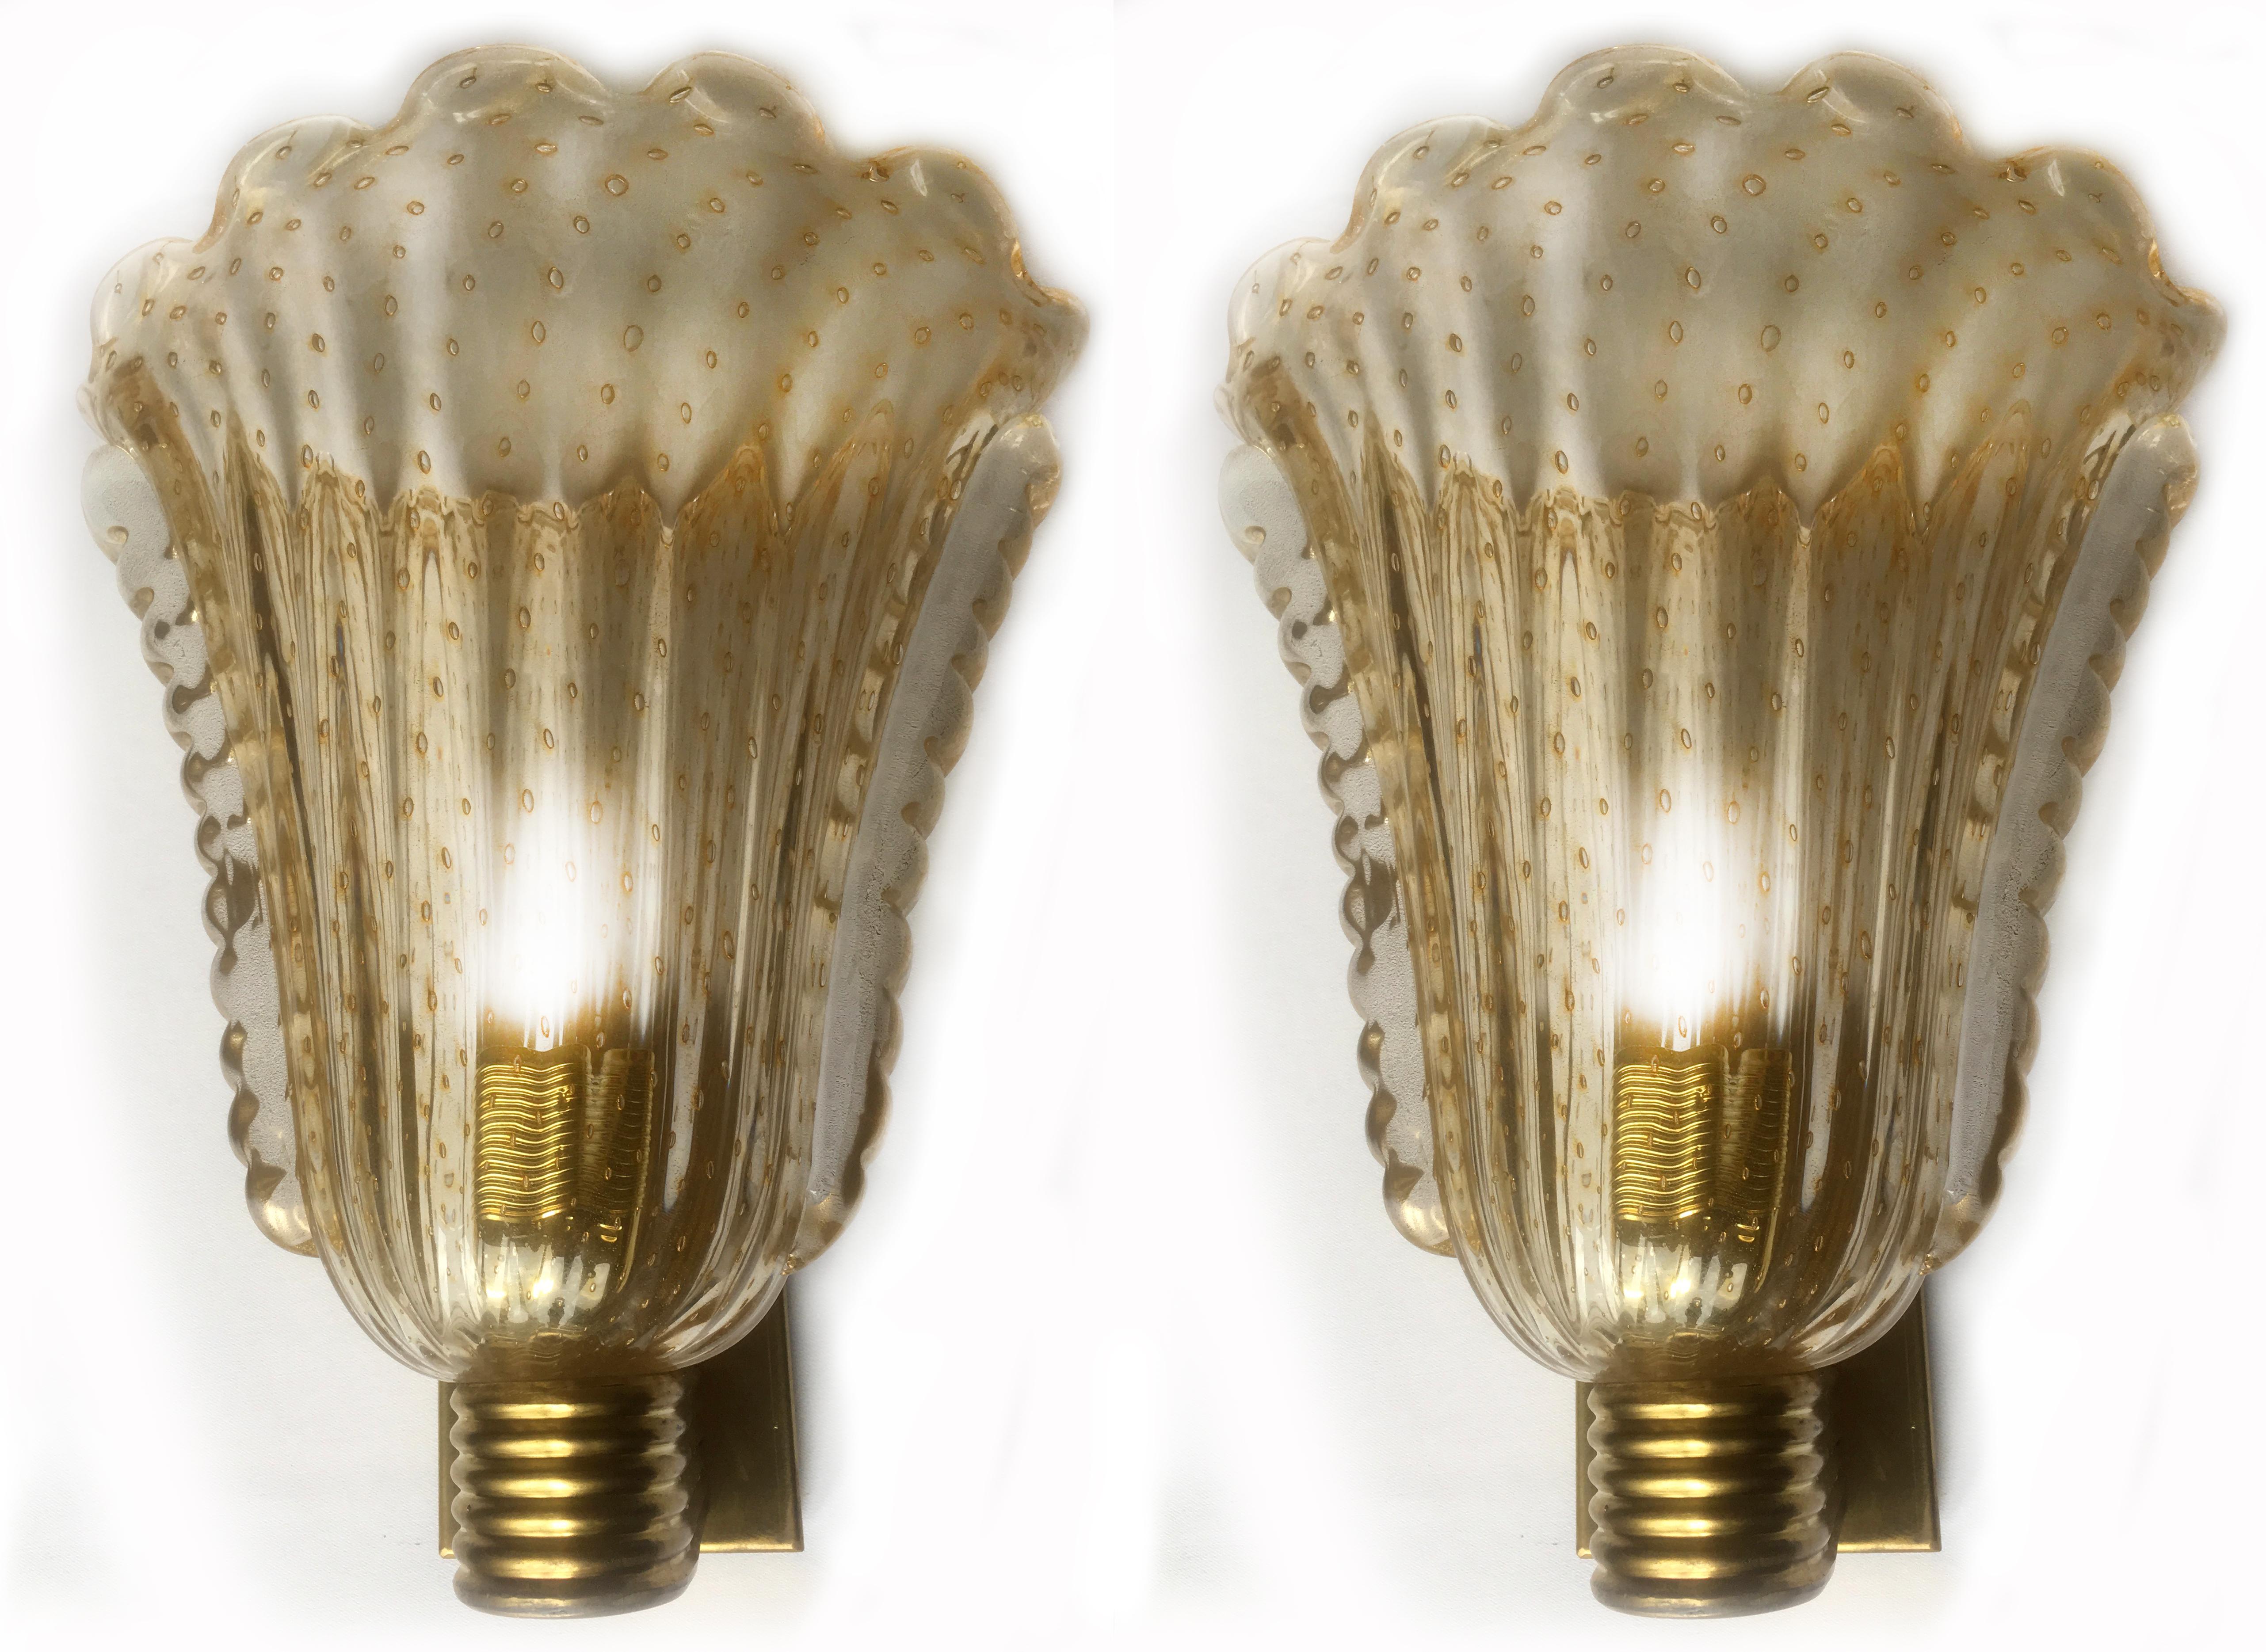 Gorgeous pair of sconces by Barovier & Toso. Words are not needed, just look at them.